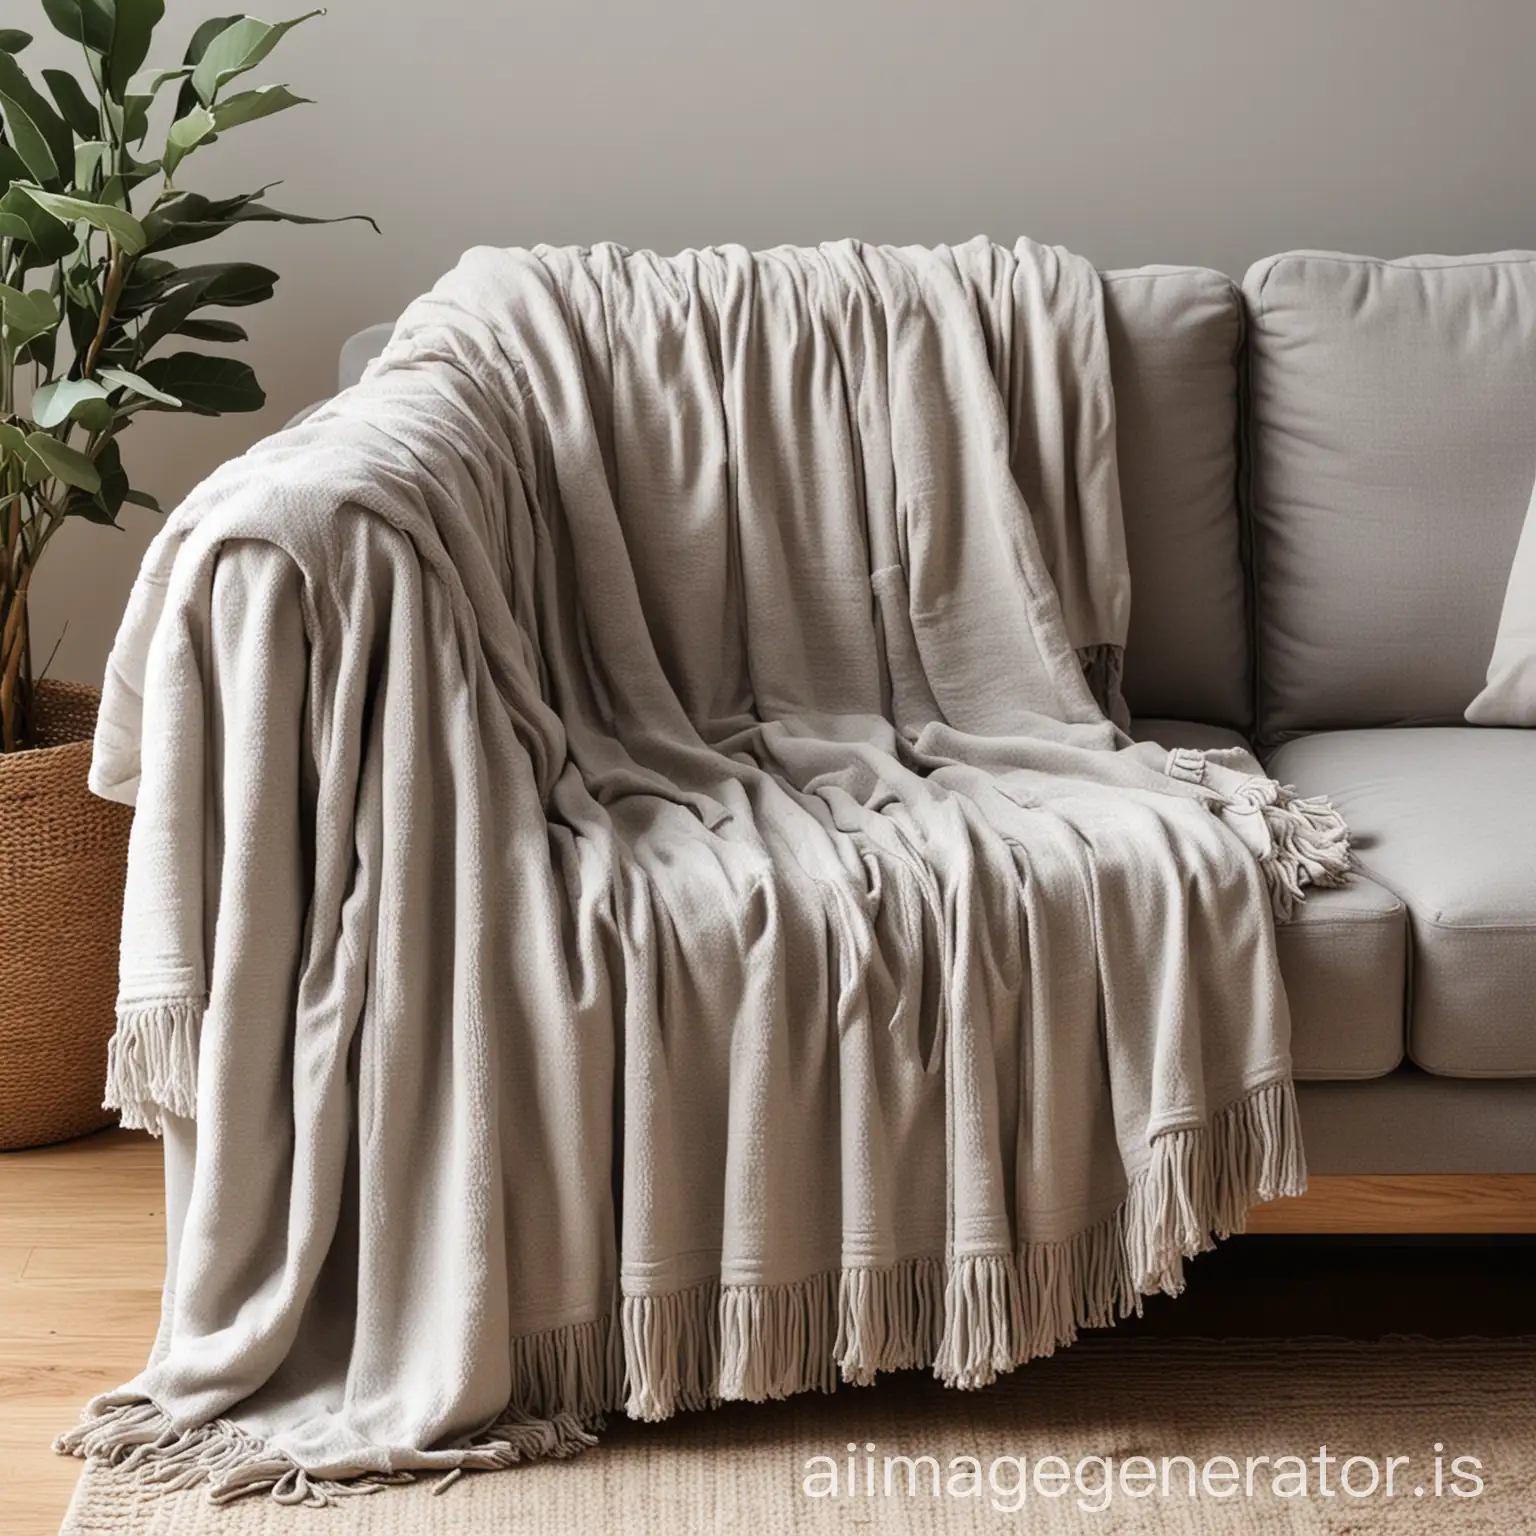 Gray Soft Throw Blanket Home Decoration Living Room Accessories Sofa Finds Couch Cover First Apartment Essential Must Have Boho Minimalist Magnolia Japandi Organic Modern Scandinavian Neutral Decor